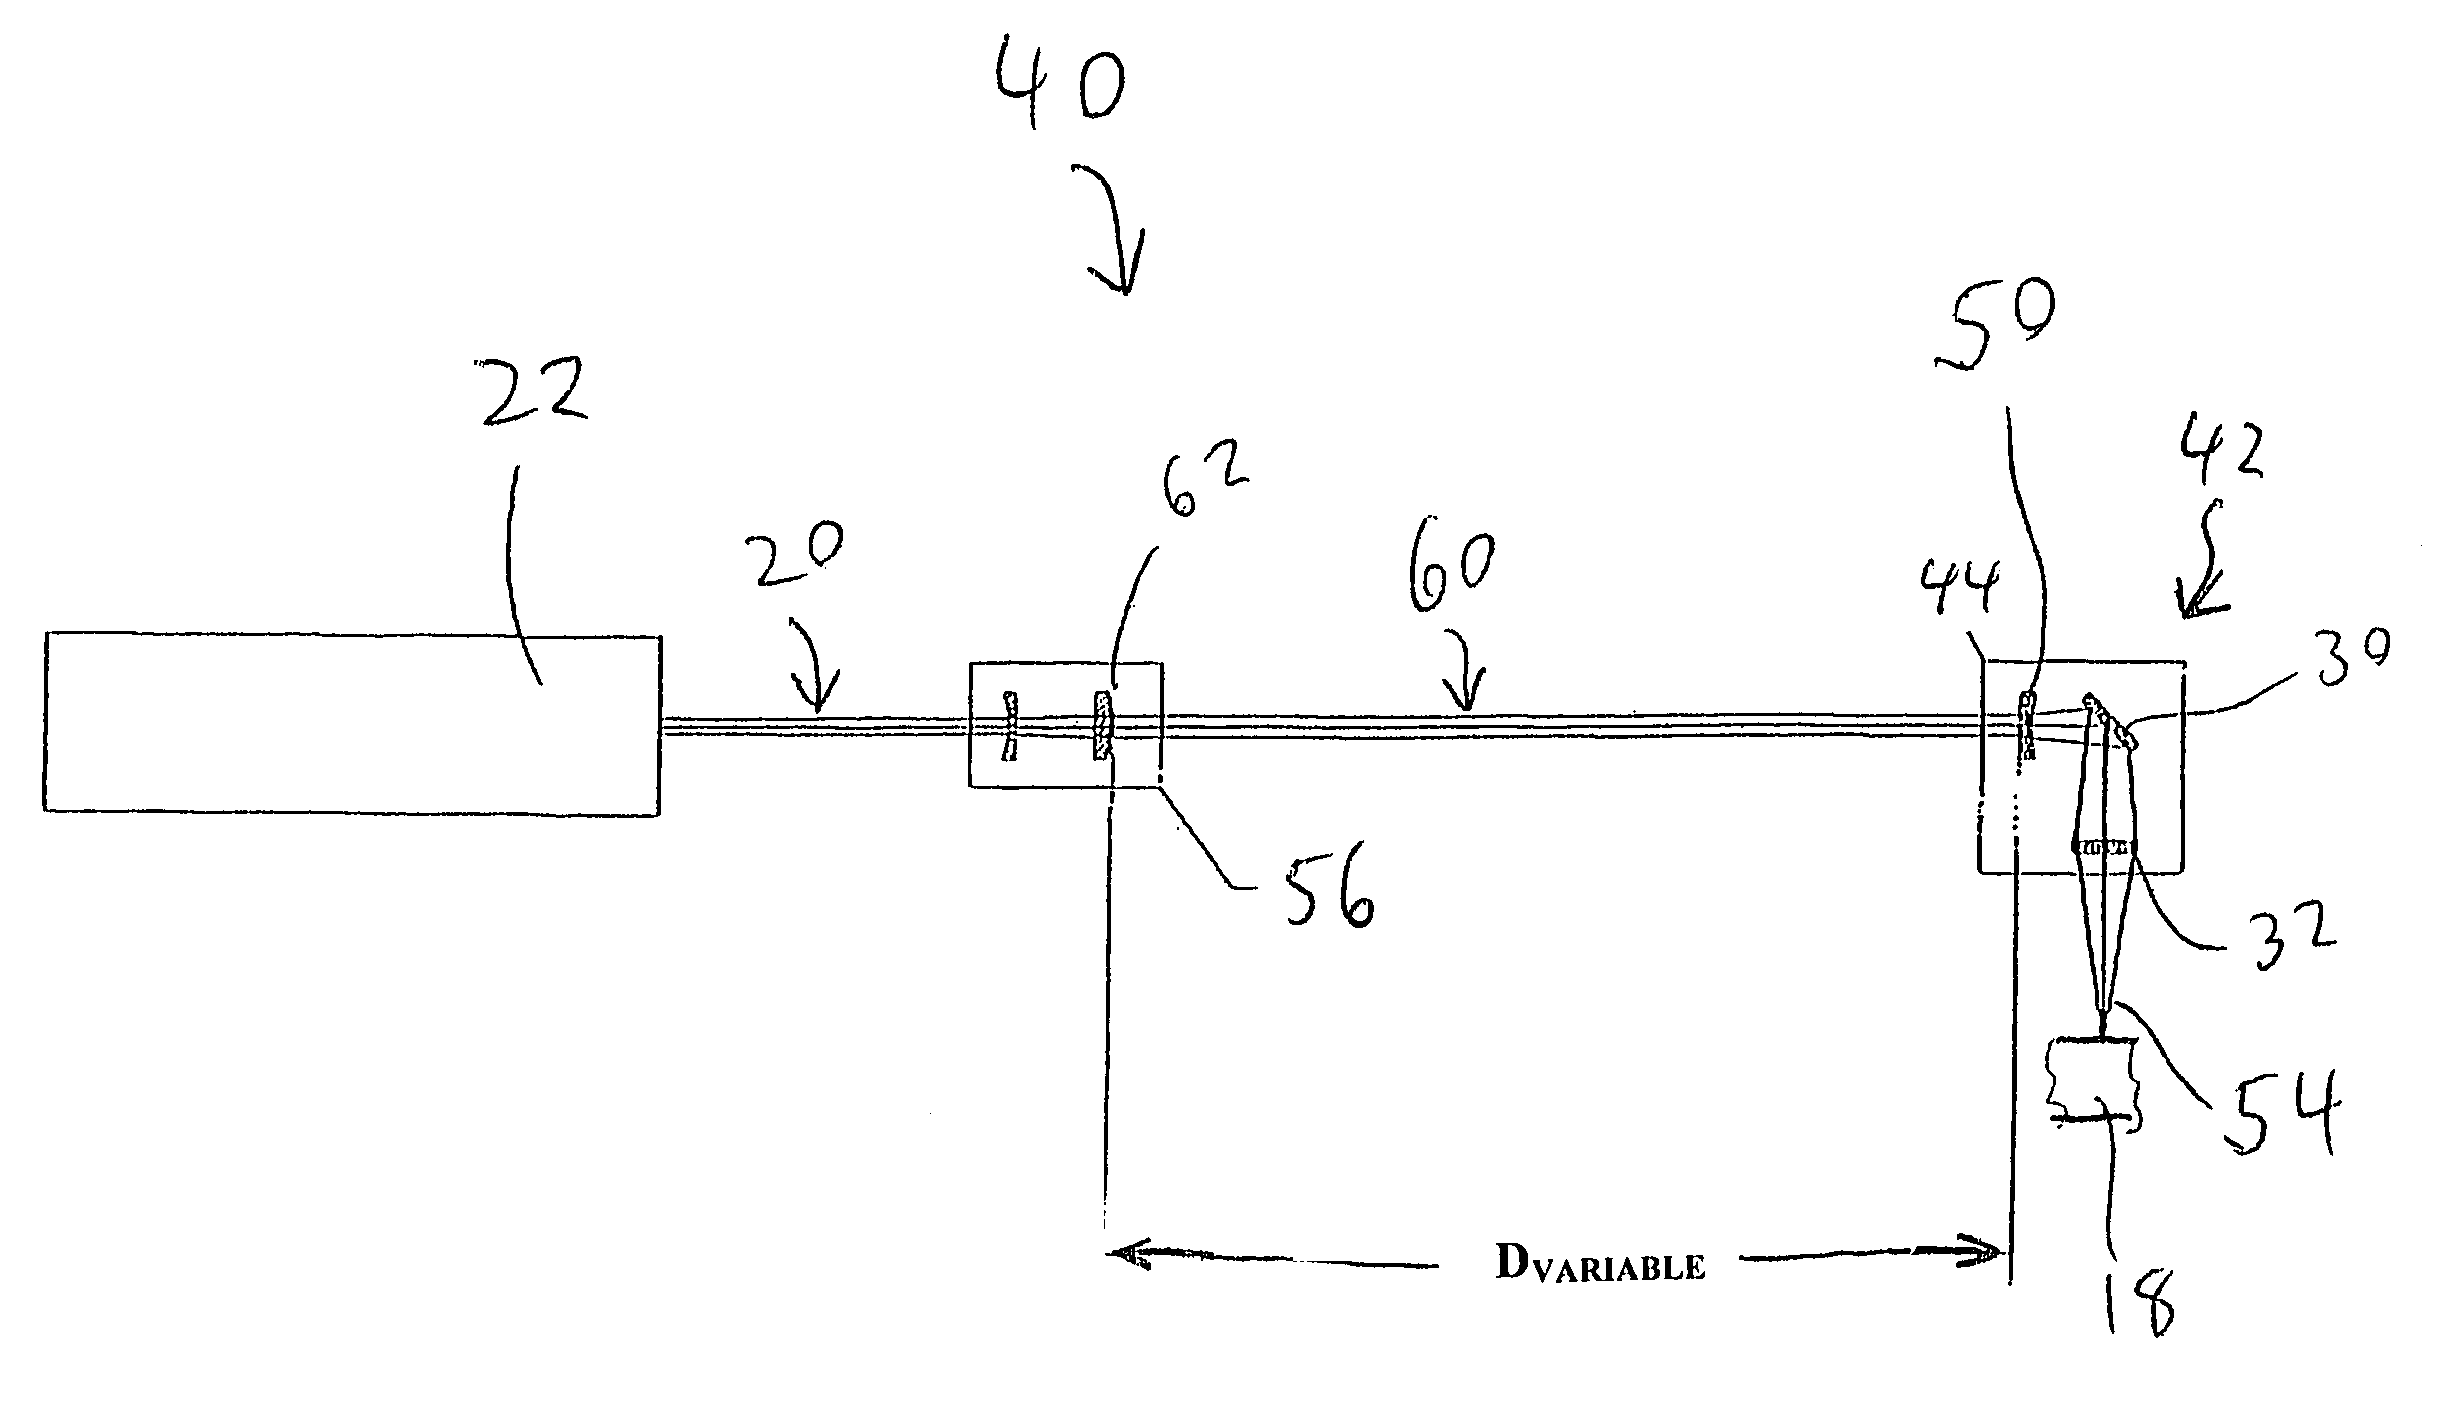 High resolution laser beam delivery apparatus